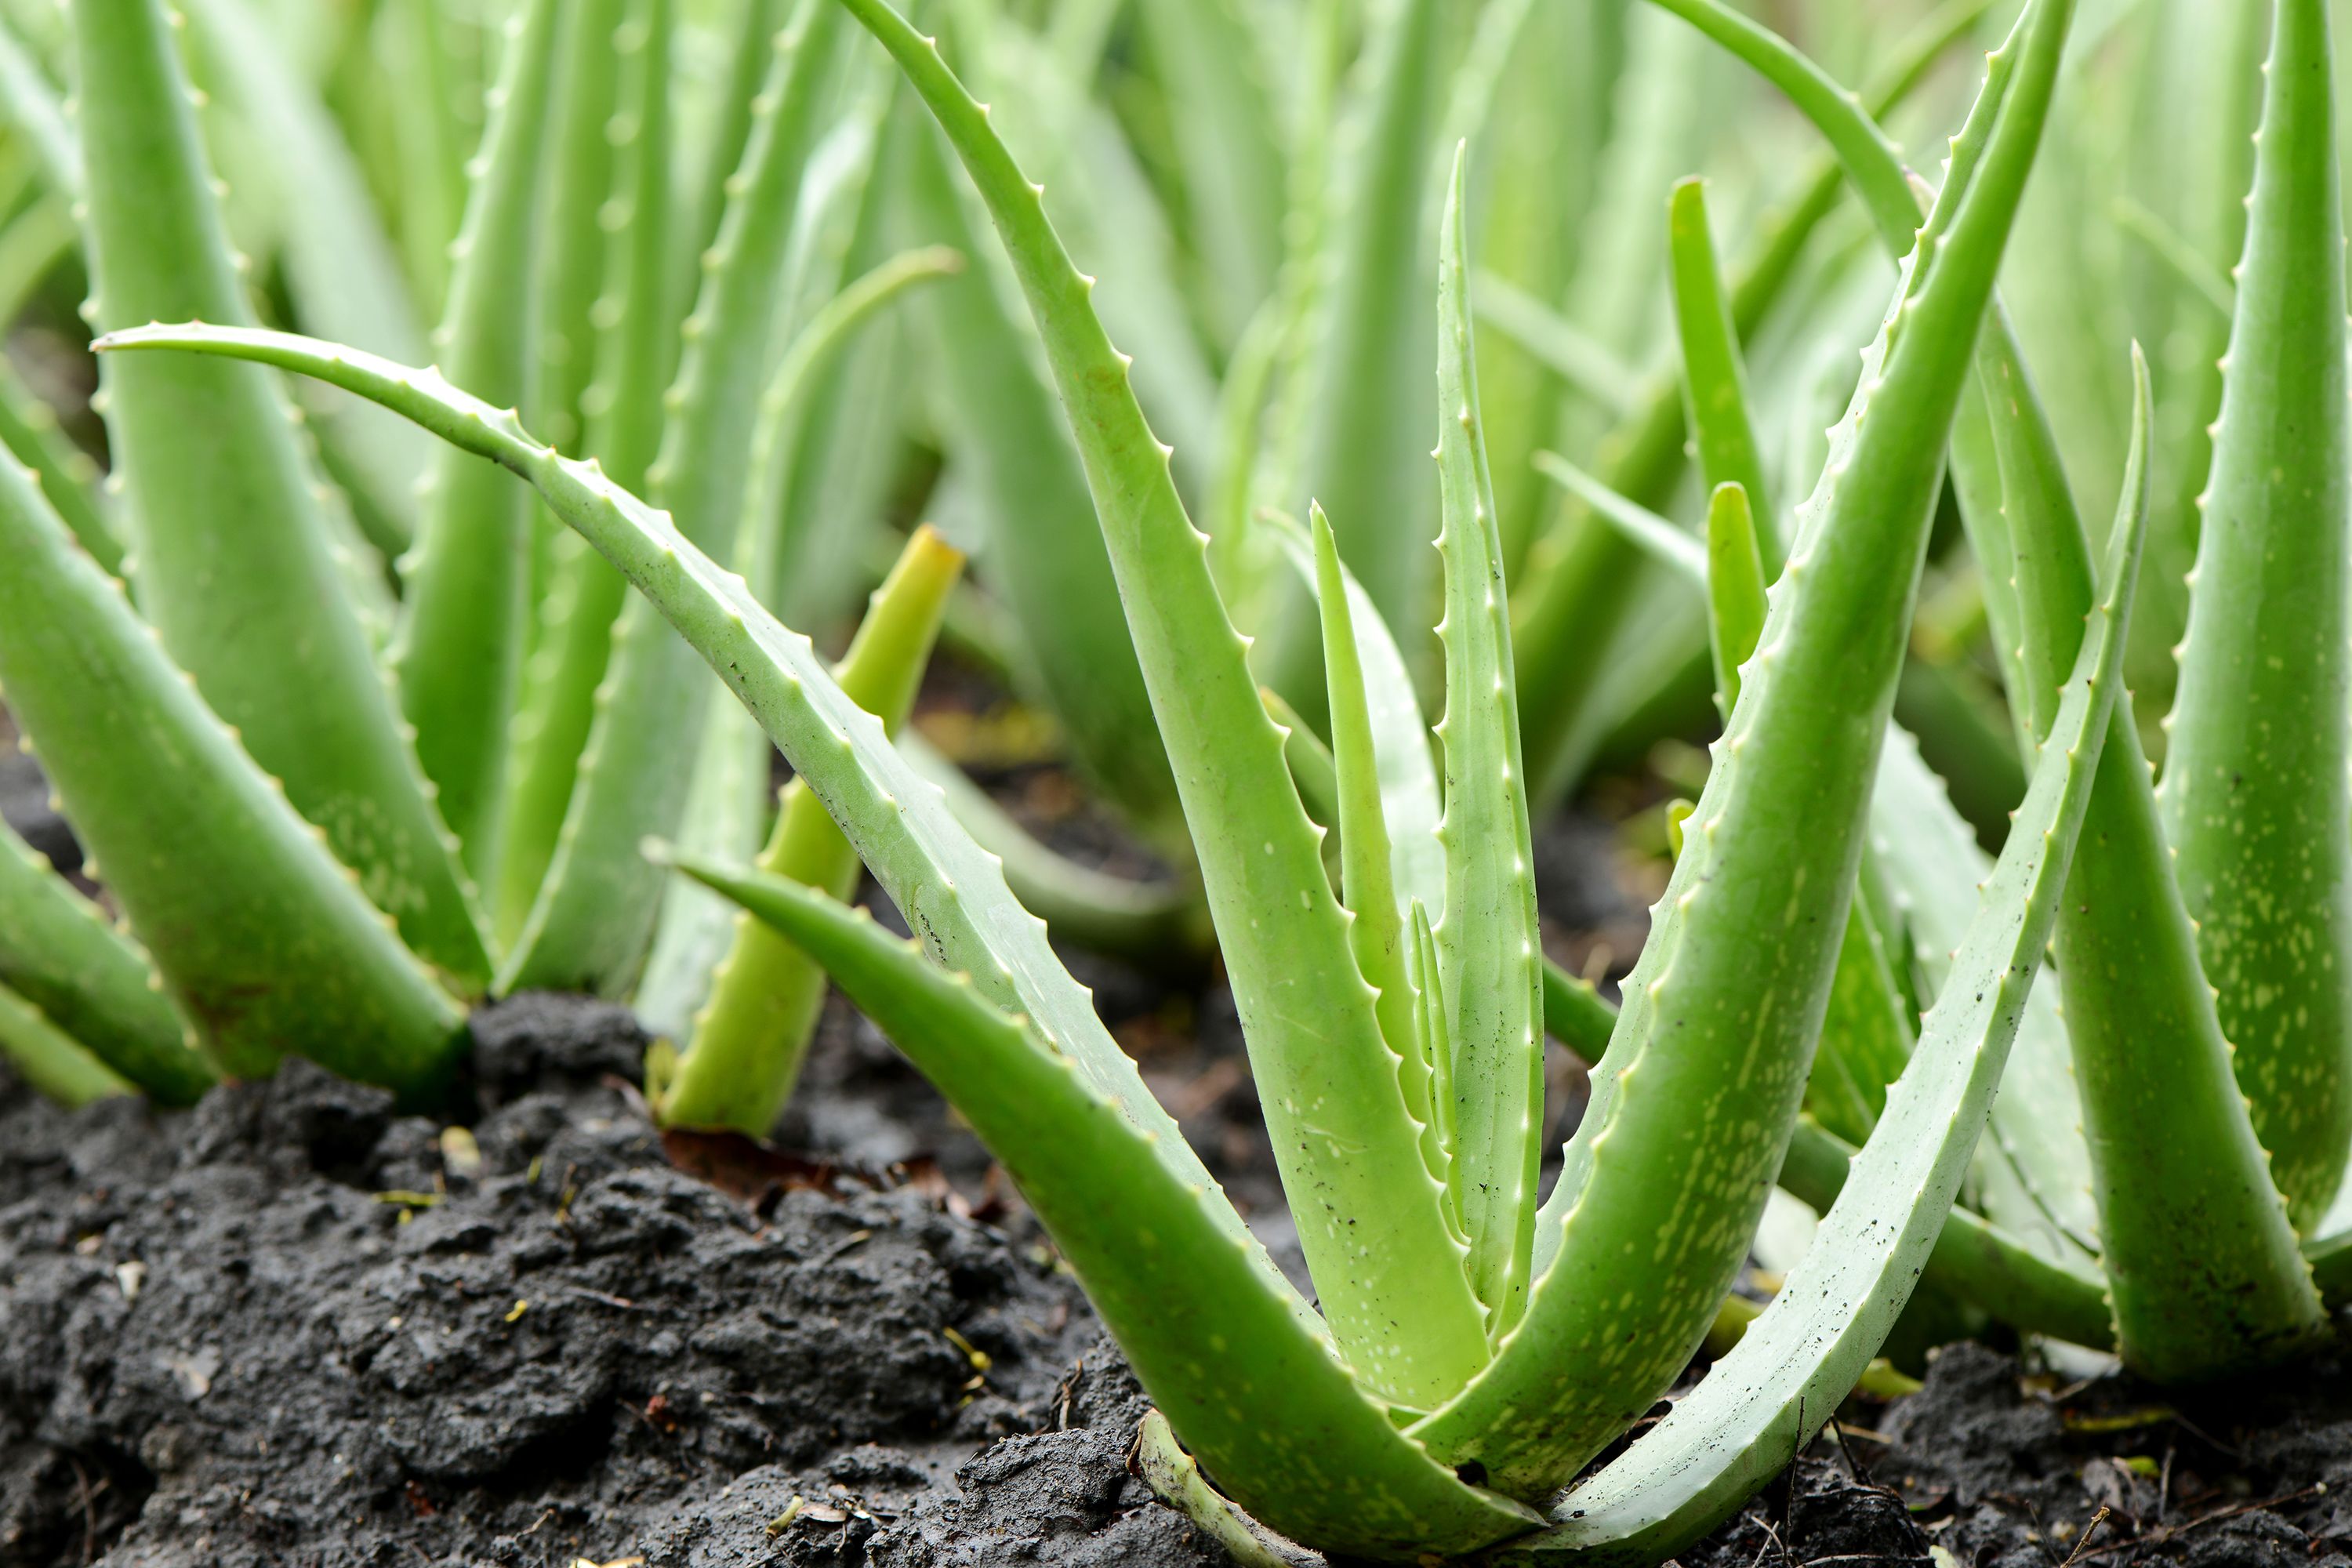 Best Soil for Aloe Vera – Miracle Grow or Regular Potting MIx?